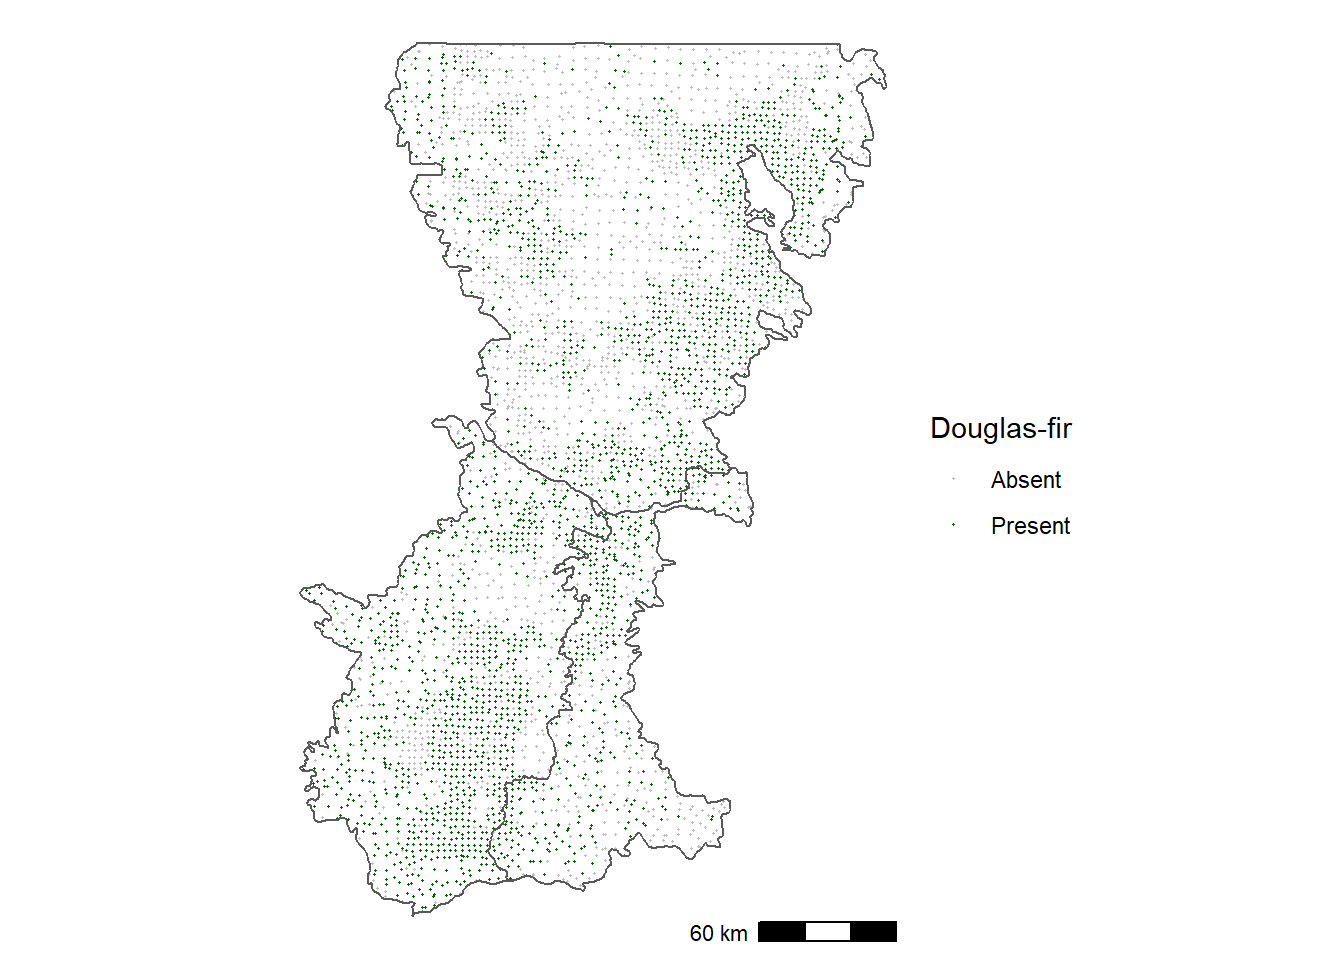 Occurrence of Douglas-fir in forest inventory plots in the Washington Cascades.